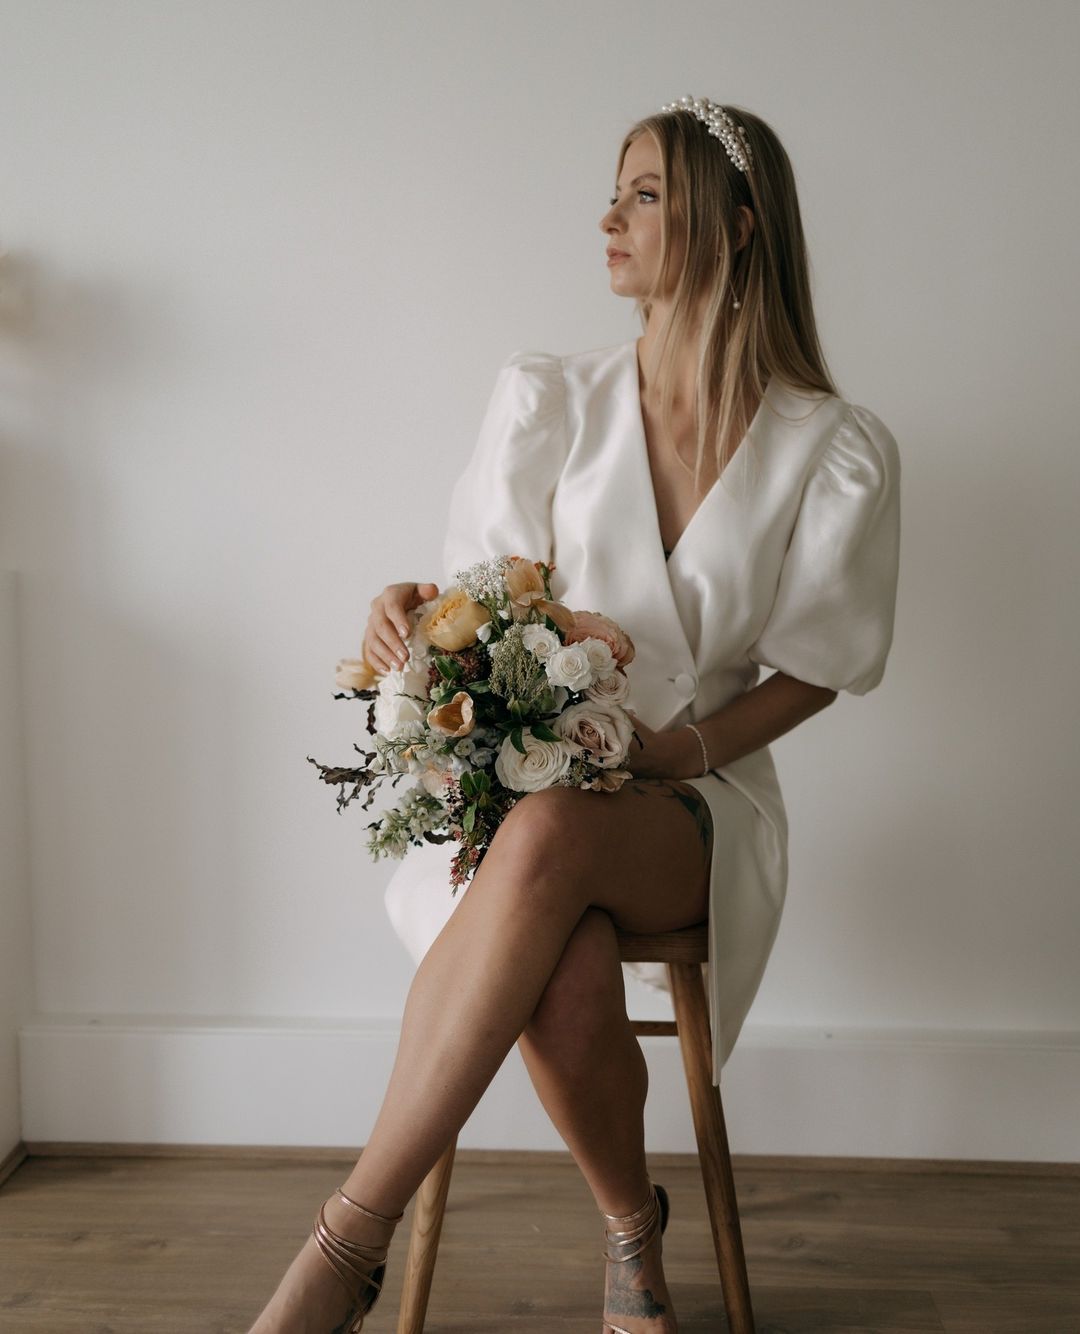 Let's talk minis. They may be small but they pack a punch and bring so much joy!⁠ | Feathers & Florence | Wedding Dress Preston